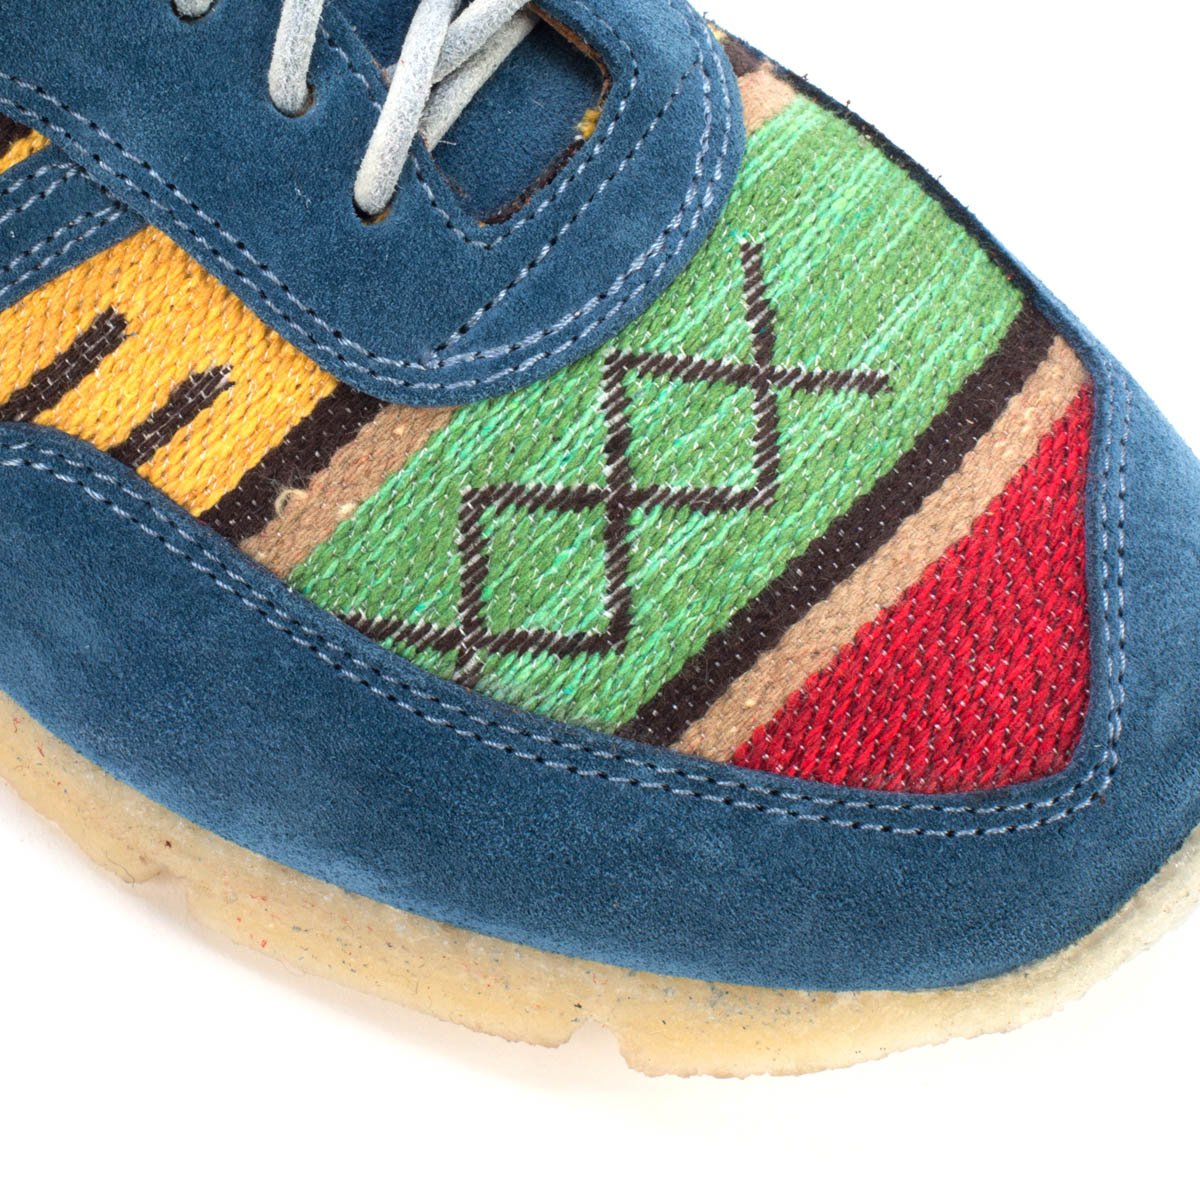 ROOTS SNEAKERS – Blue